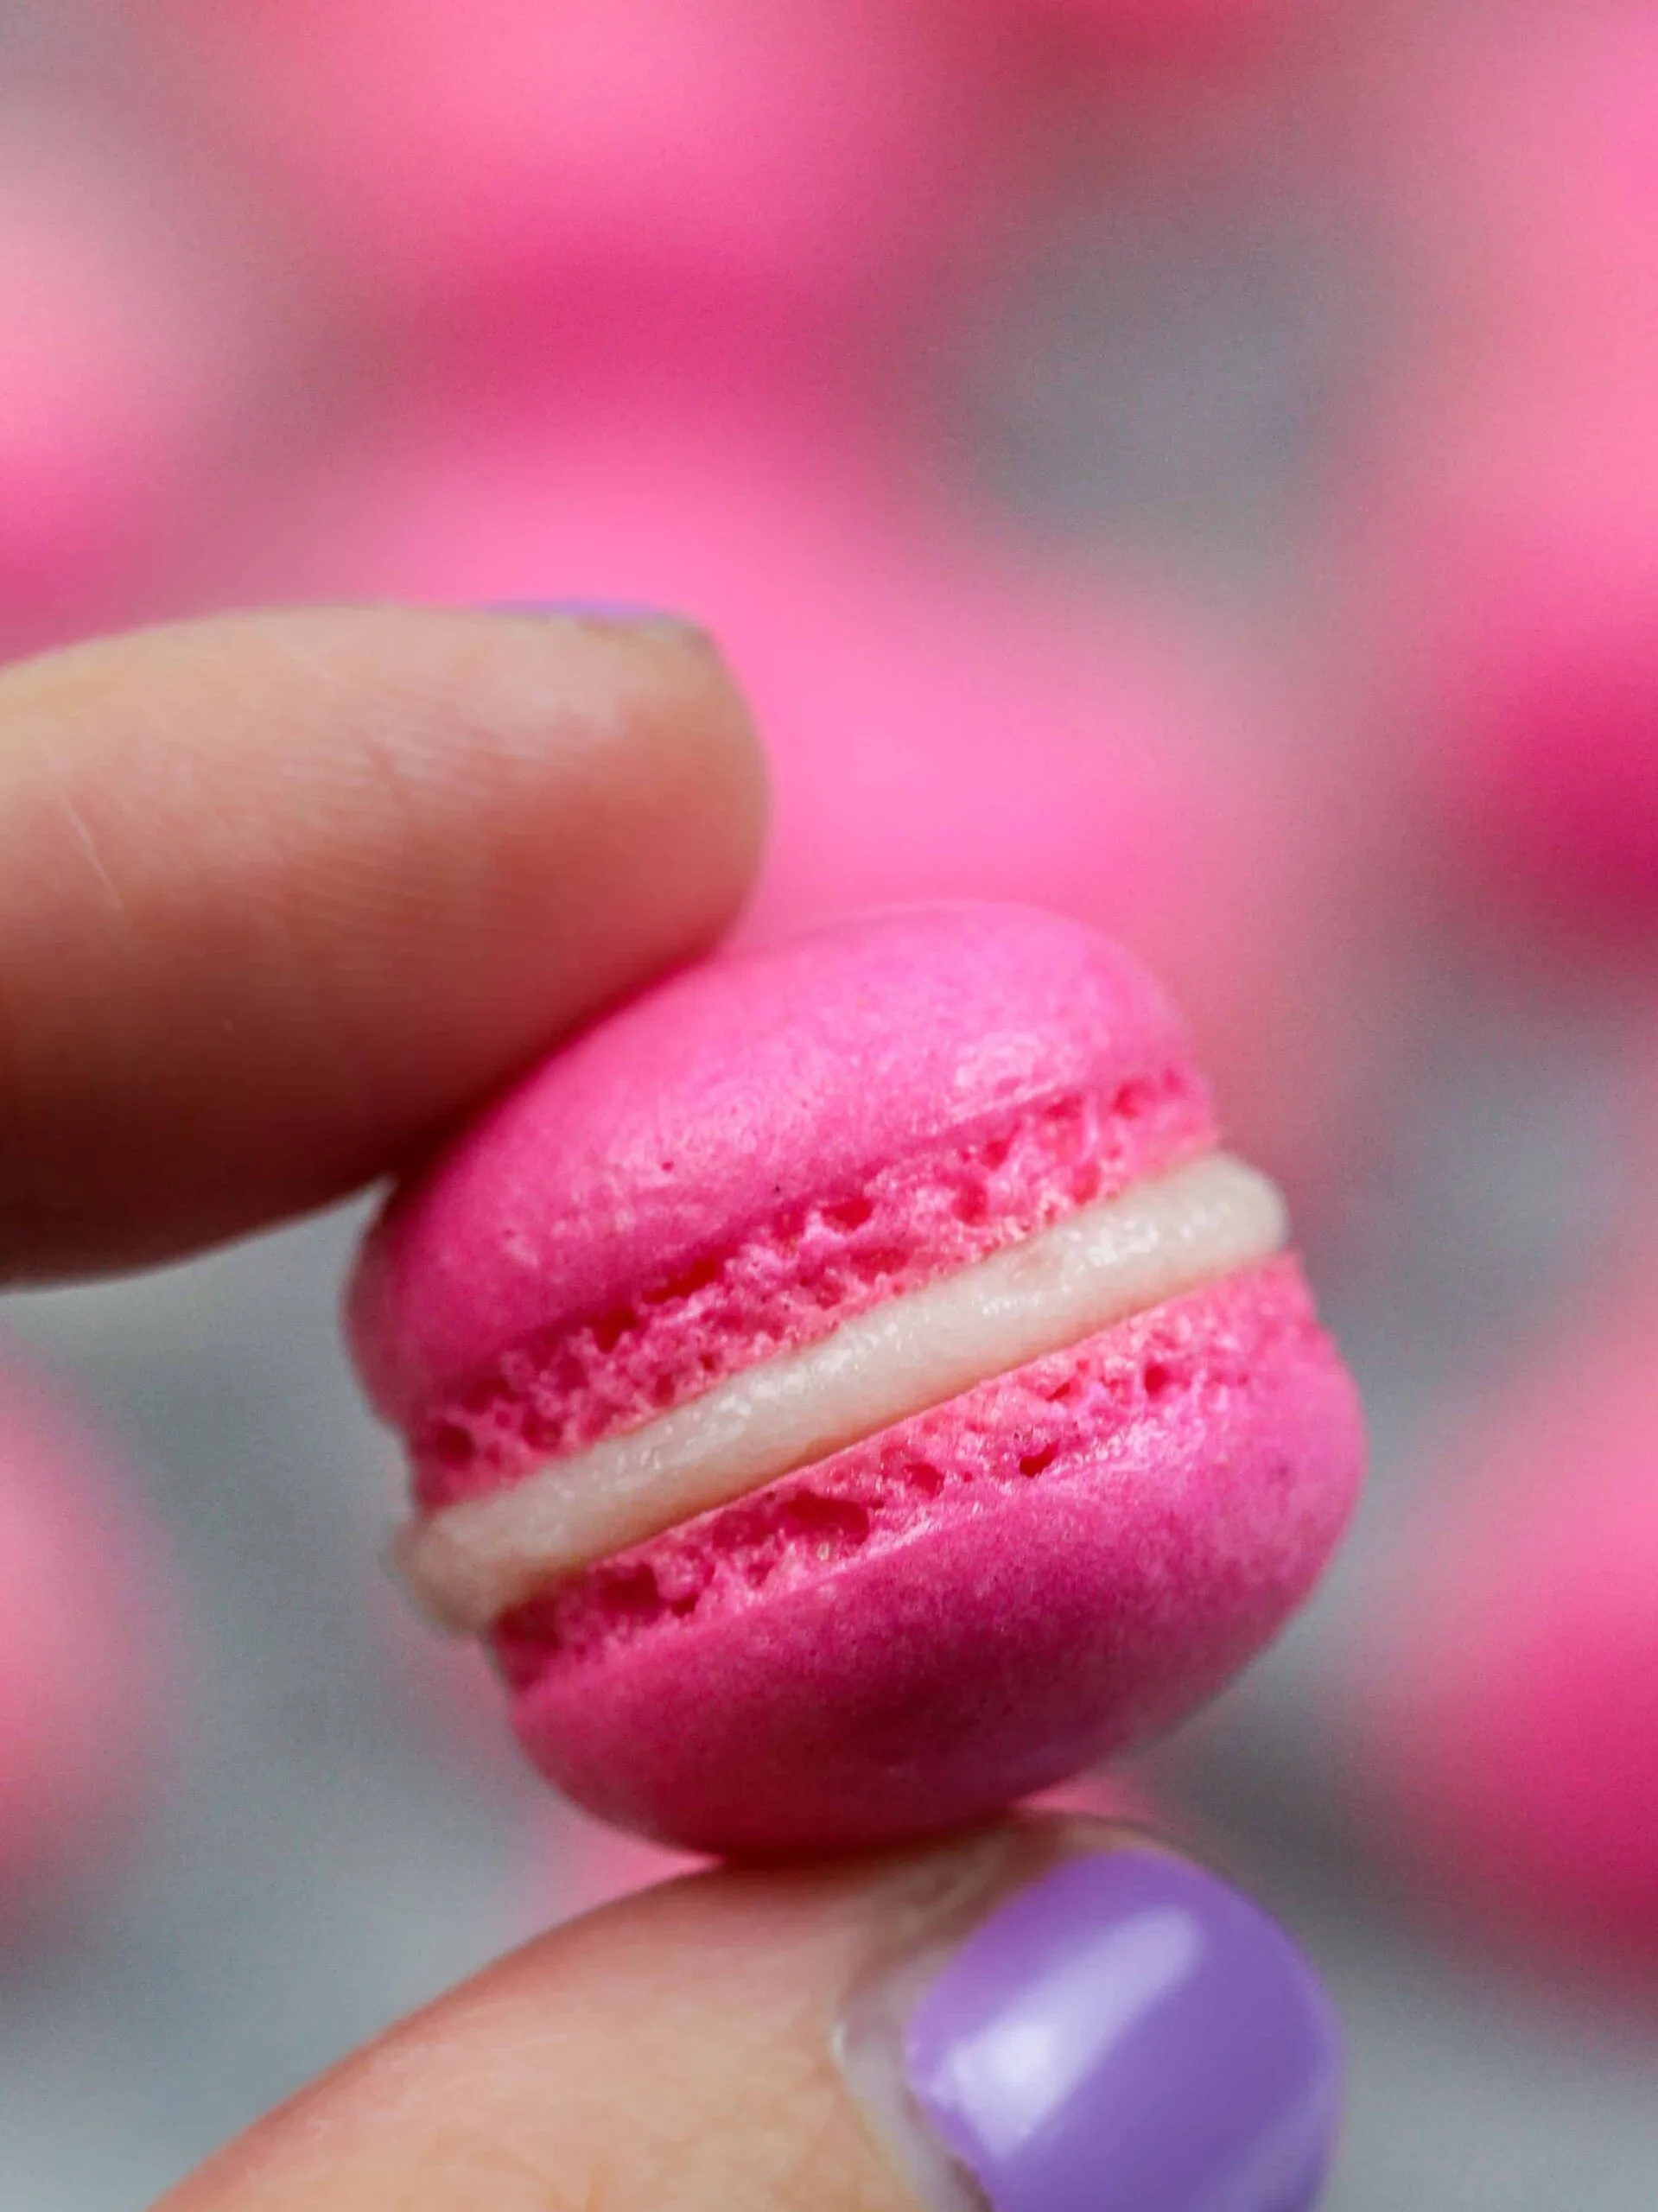 image of a mini macaron filled with buttercream frosting